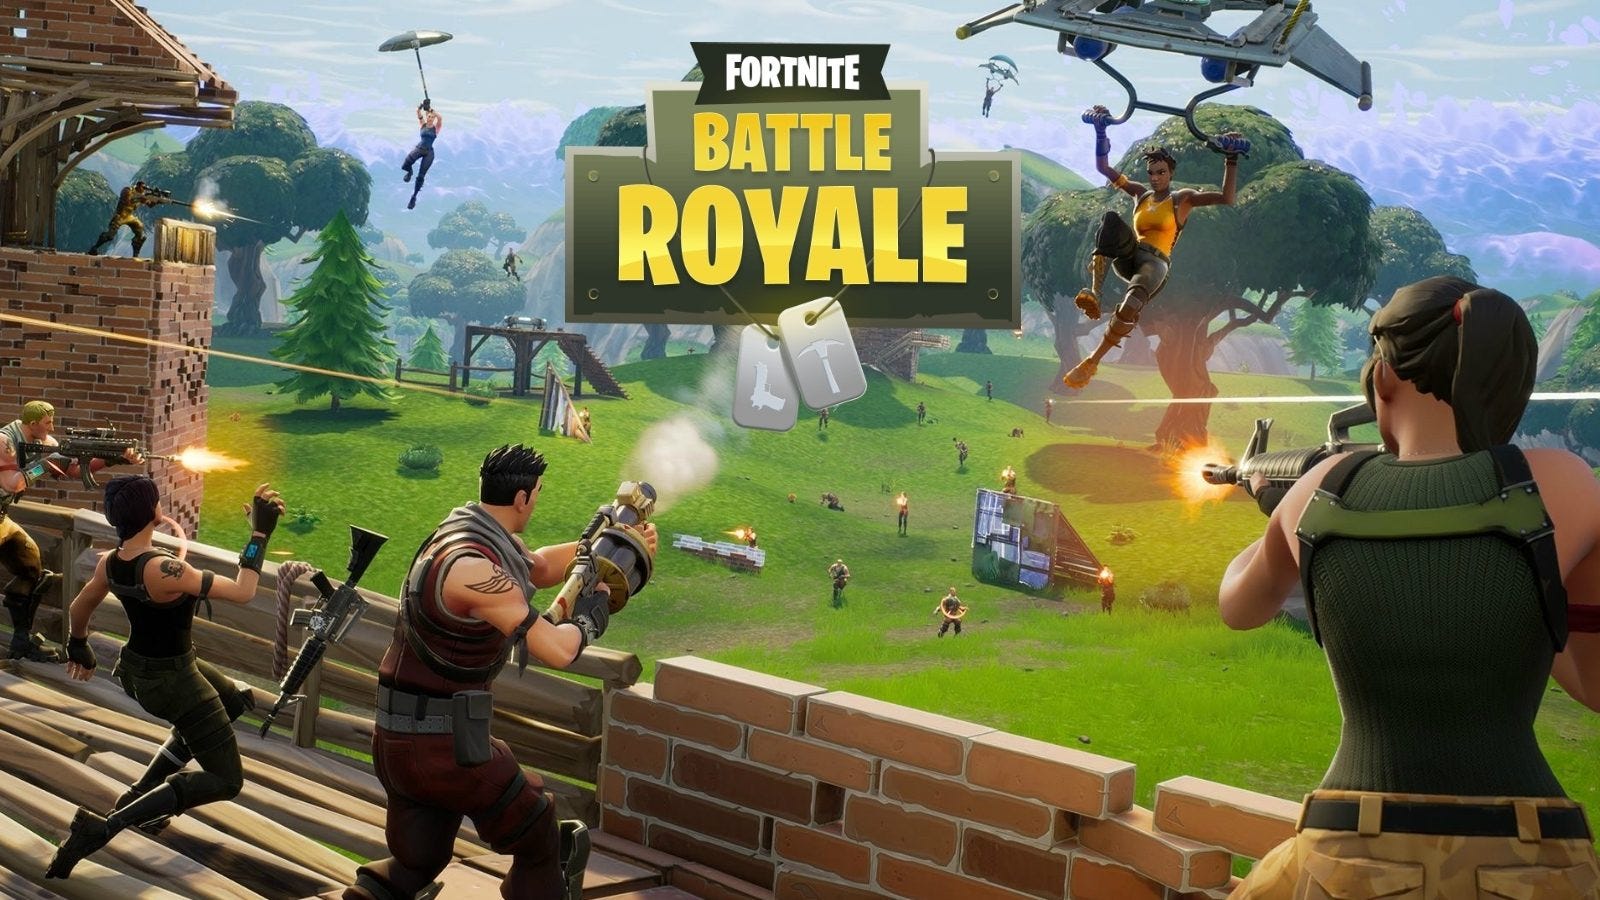 10 Reasons Why Fortnite Is Designed For Success And What You Can - newsflash if you haven t heard of fortnite by now you ve been living under a rock just type up how many players and google will autocomplete your